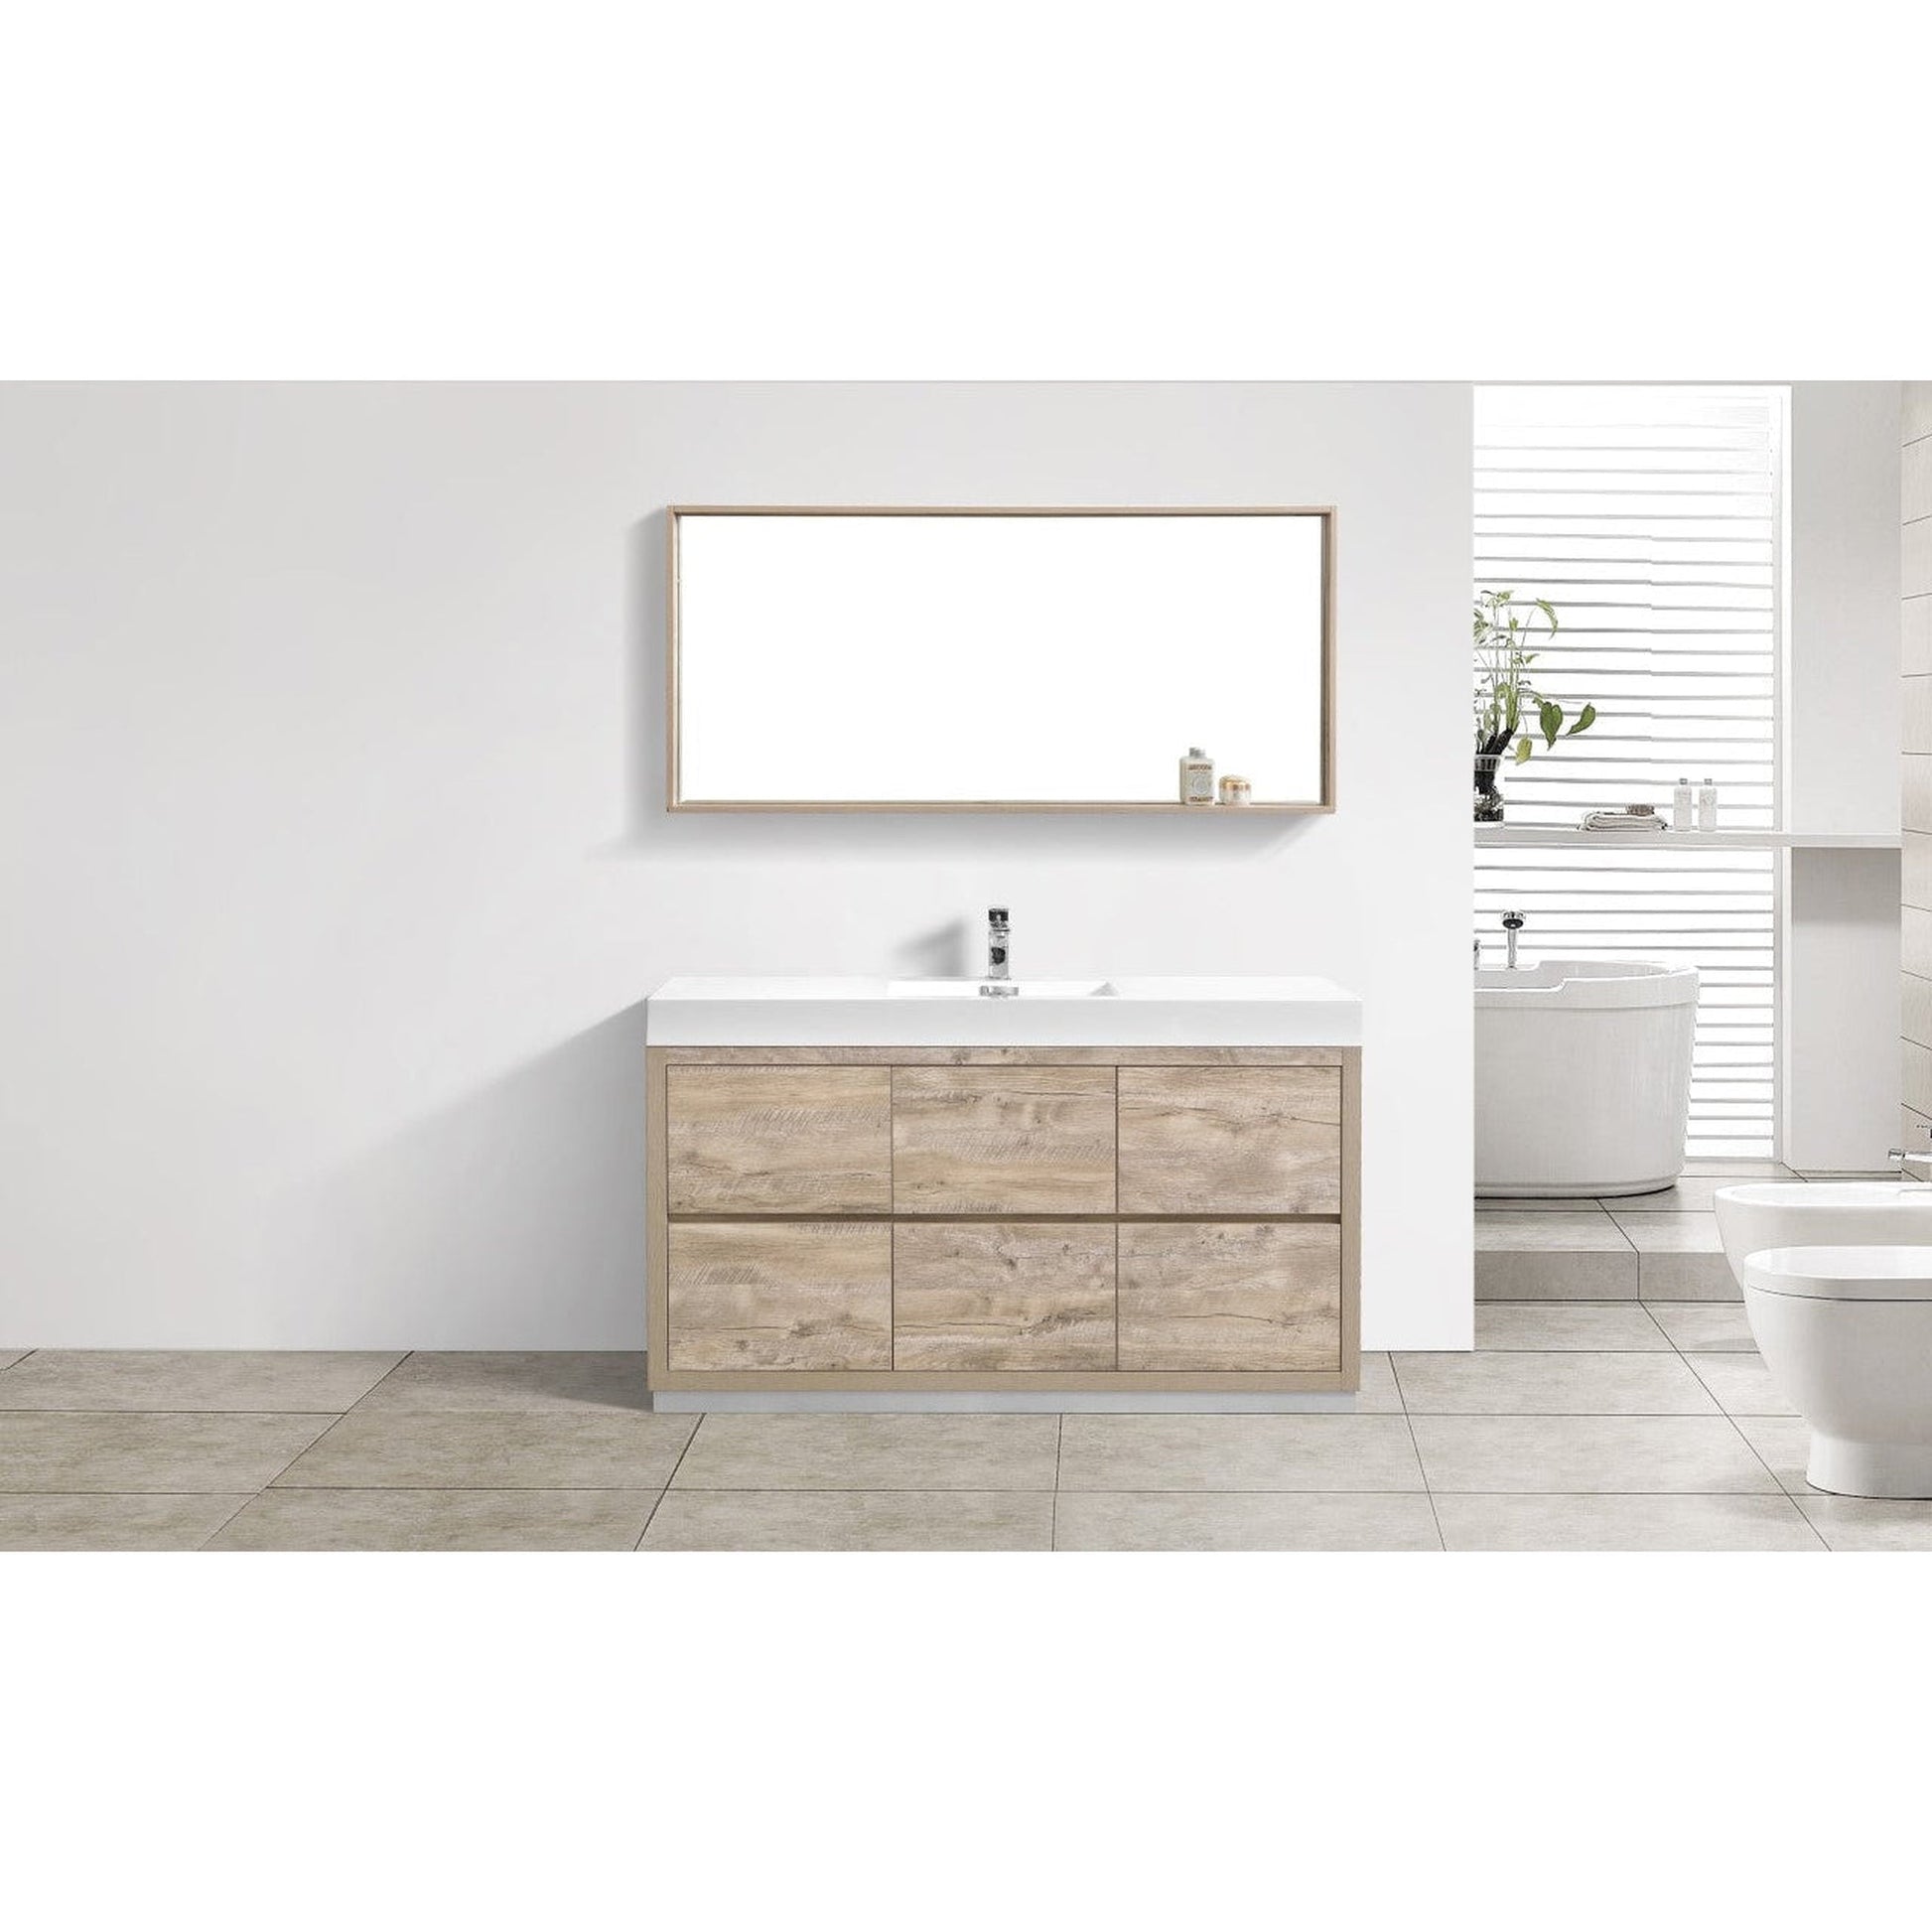 KubeBath Bliss 60" Nature Wood Freestanding Modern Bathroom Vanity With Single Integrated Acrylic Sink With Overflow and 60" Wood Framed Mirror With Shelf